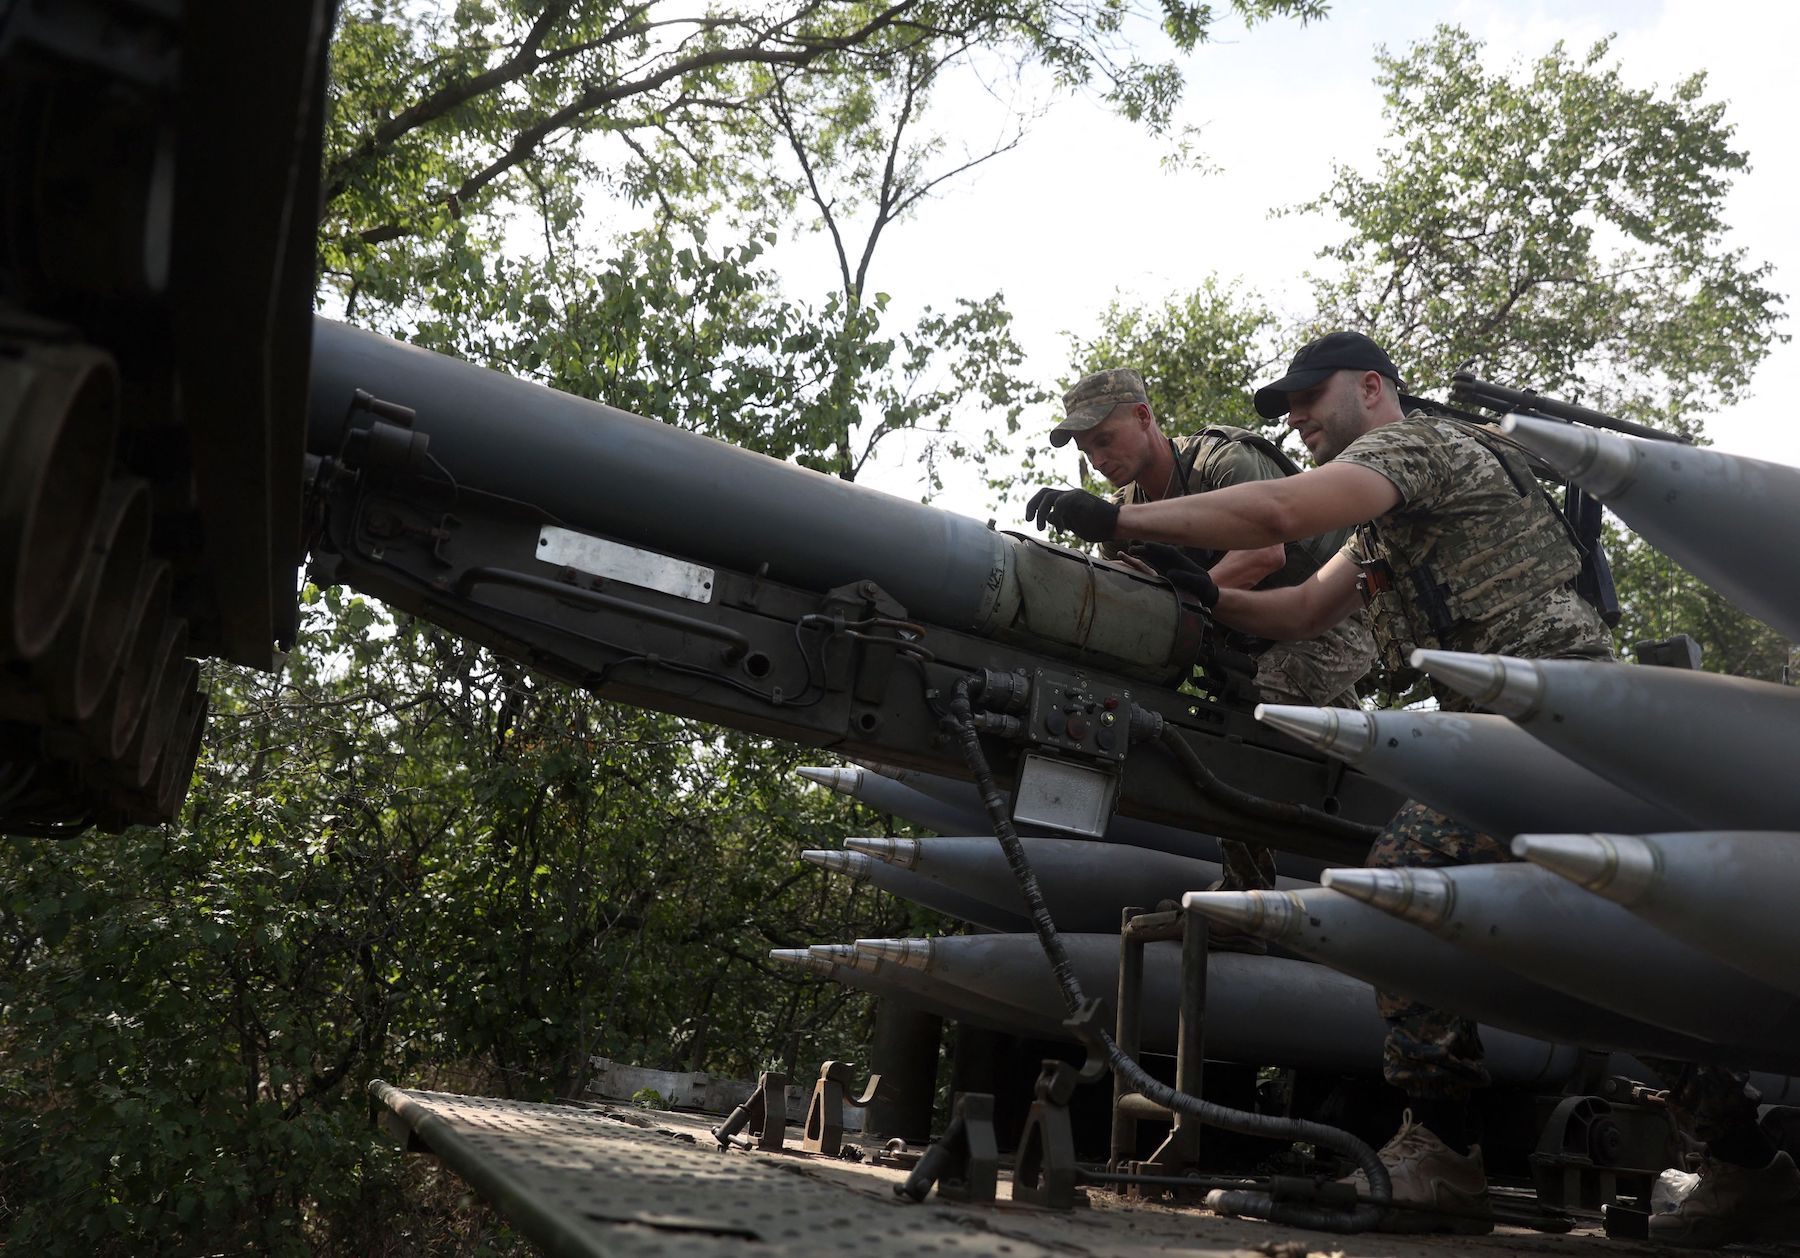 Ukrainian gunners prepare to fire with a self-propelled multiple rocket launcher at a position near a frontline in Donetsk region on August 27.